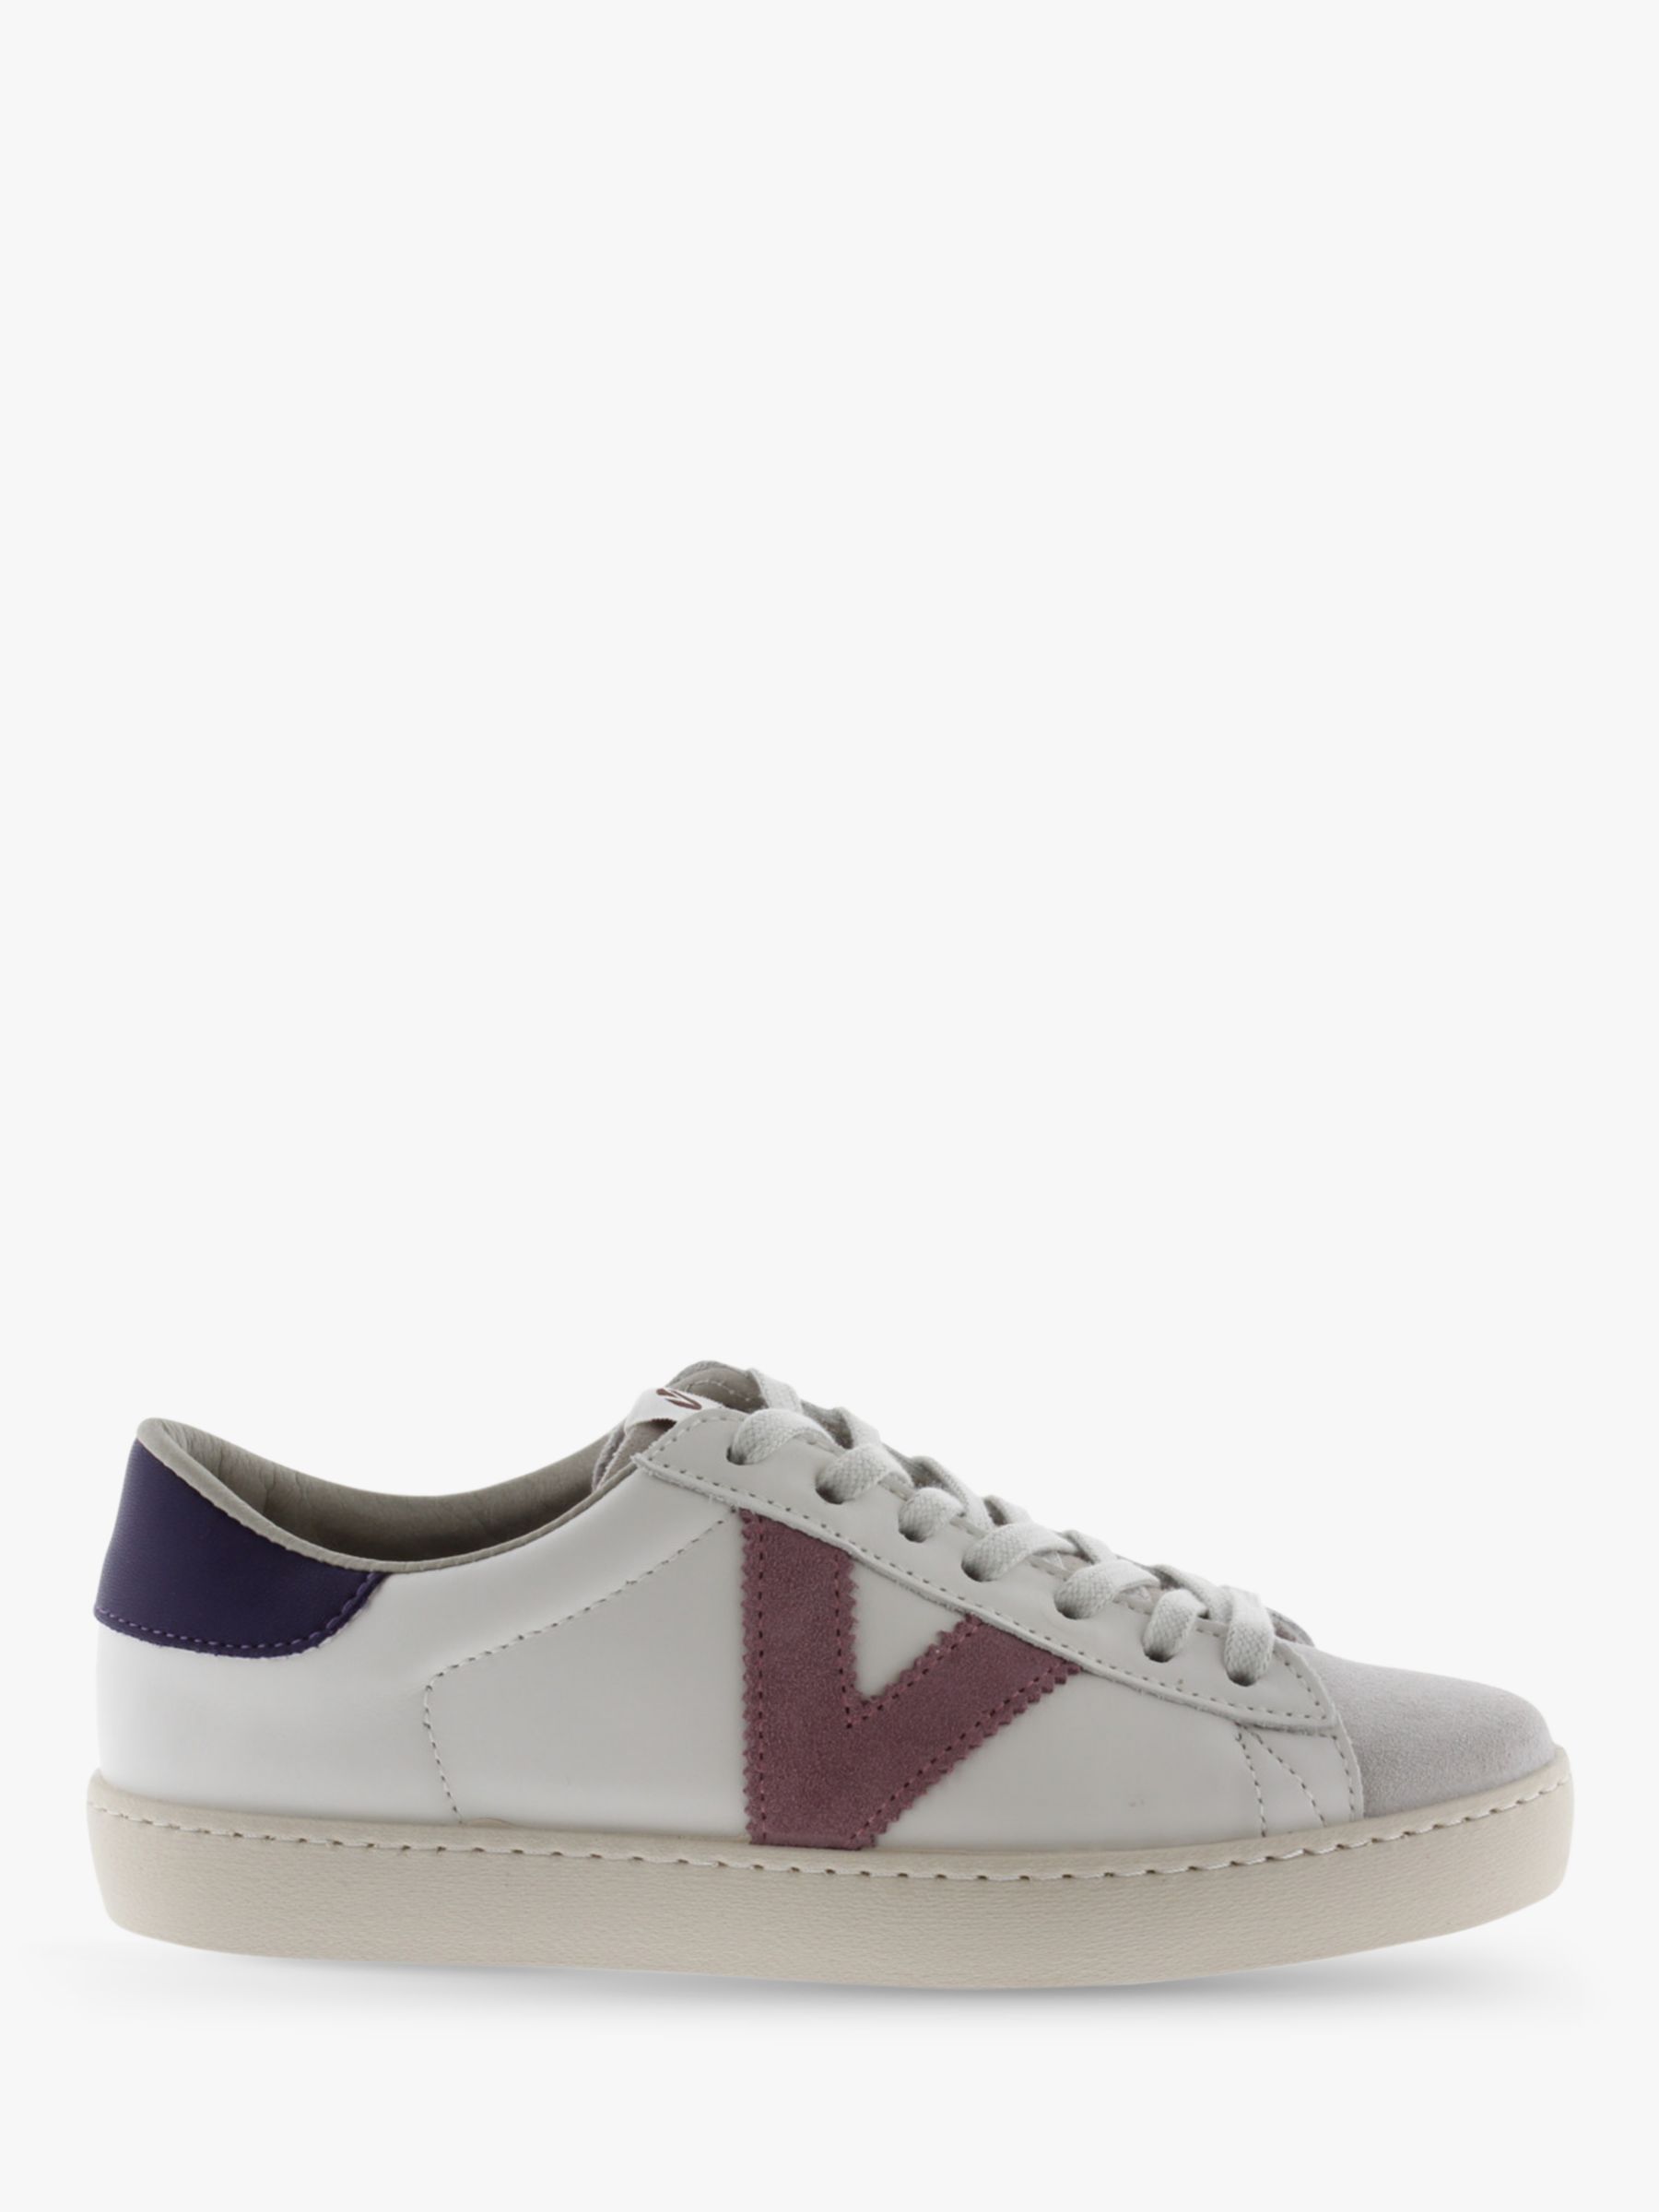 Victoria Shoes Berlin Contrast Detail Low Top Trainers, White/Multi